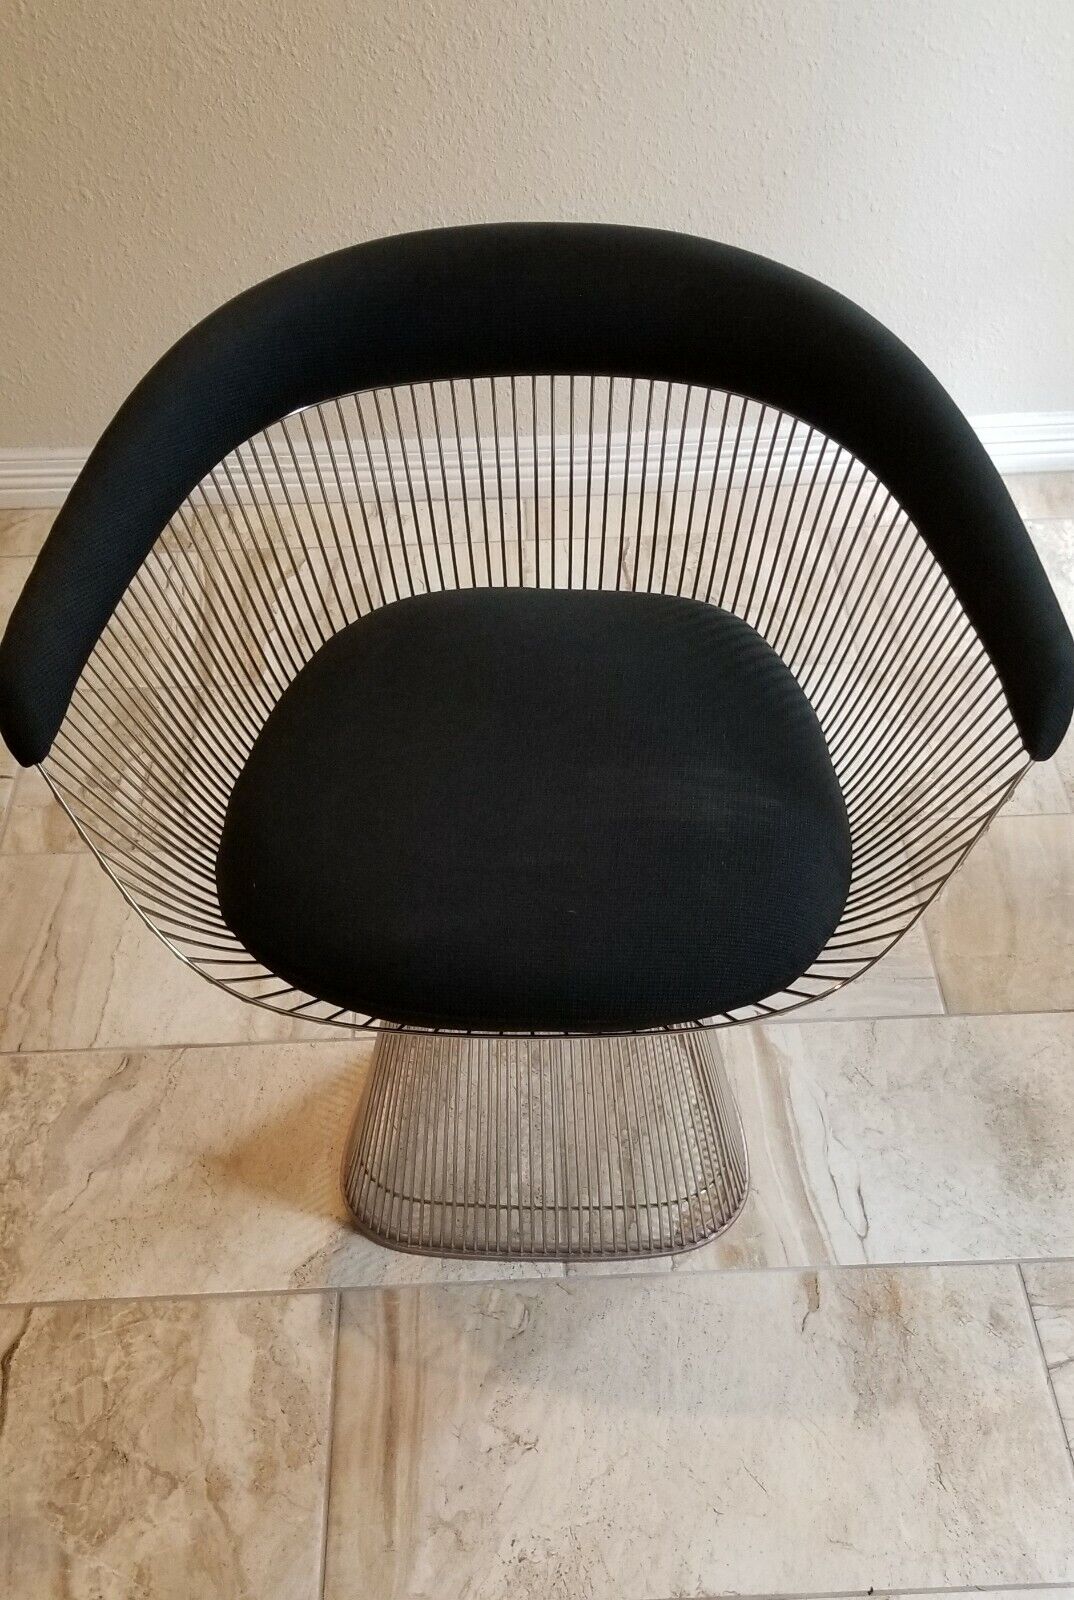 Knoll Warren Platner Arm Chair (Two Available)